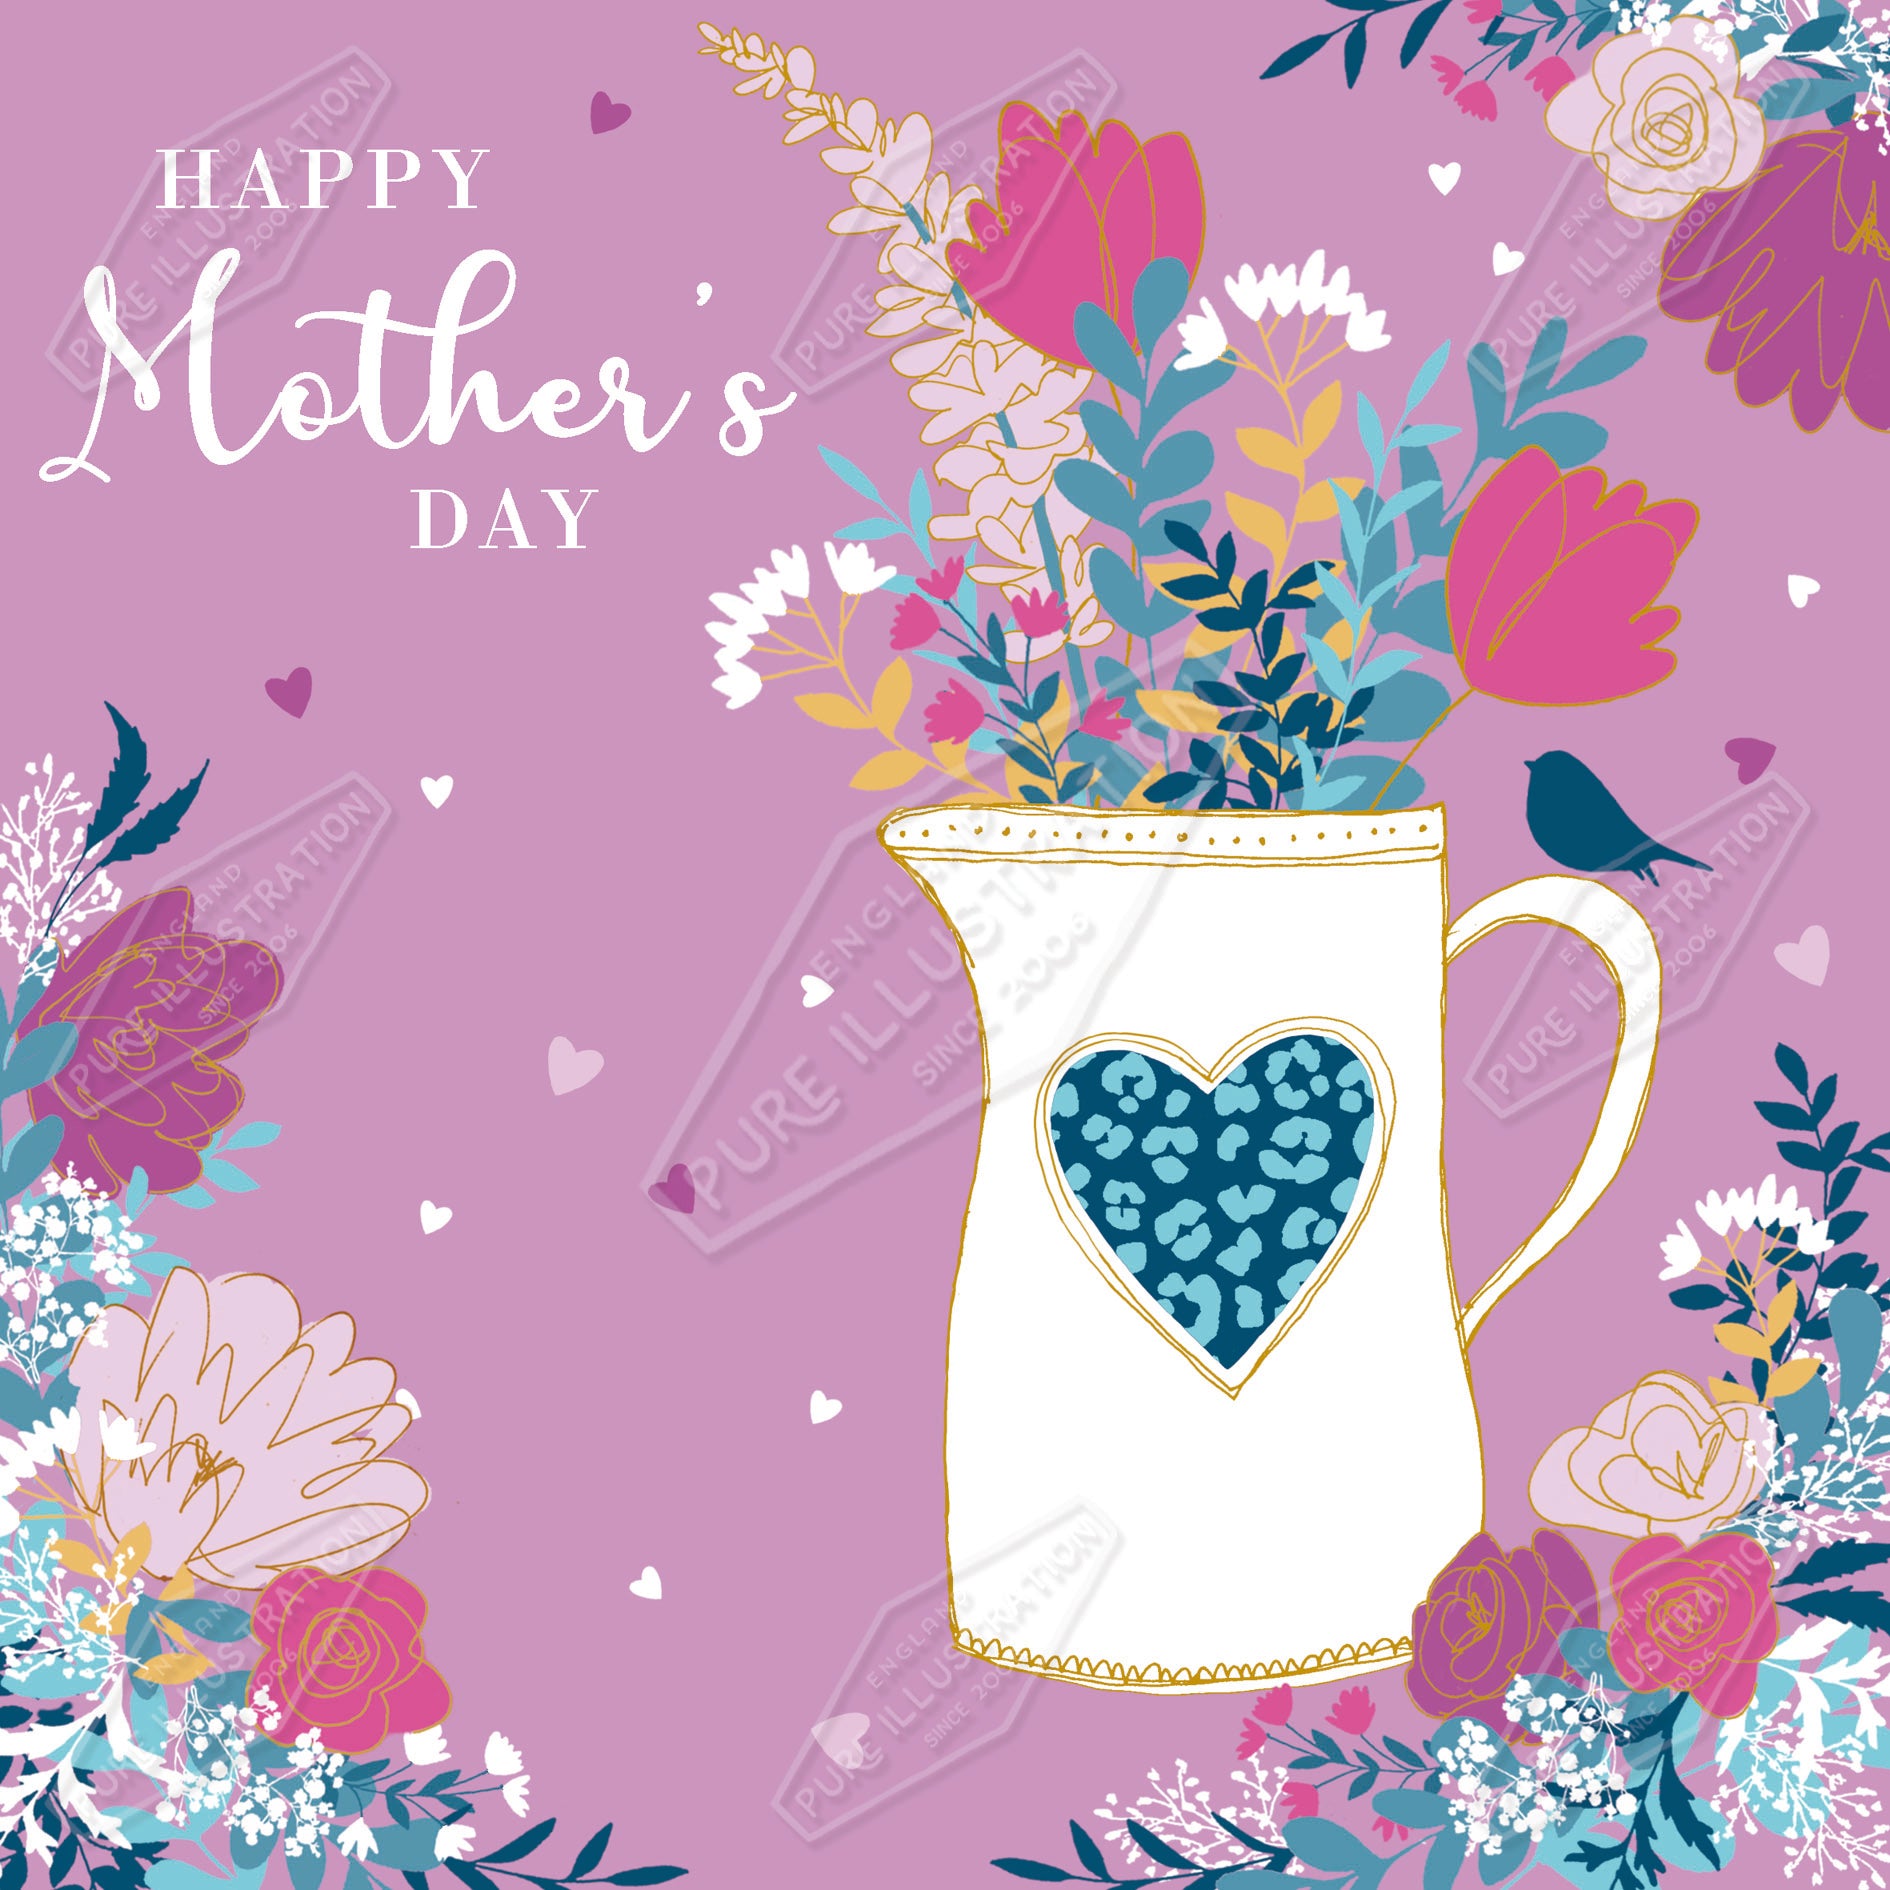 00035464CMI - Caitlin Miller is represented by Pure Art Licensing Agency - Mother's Day Greeting Card Design